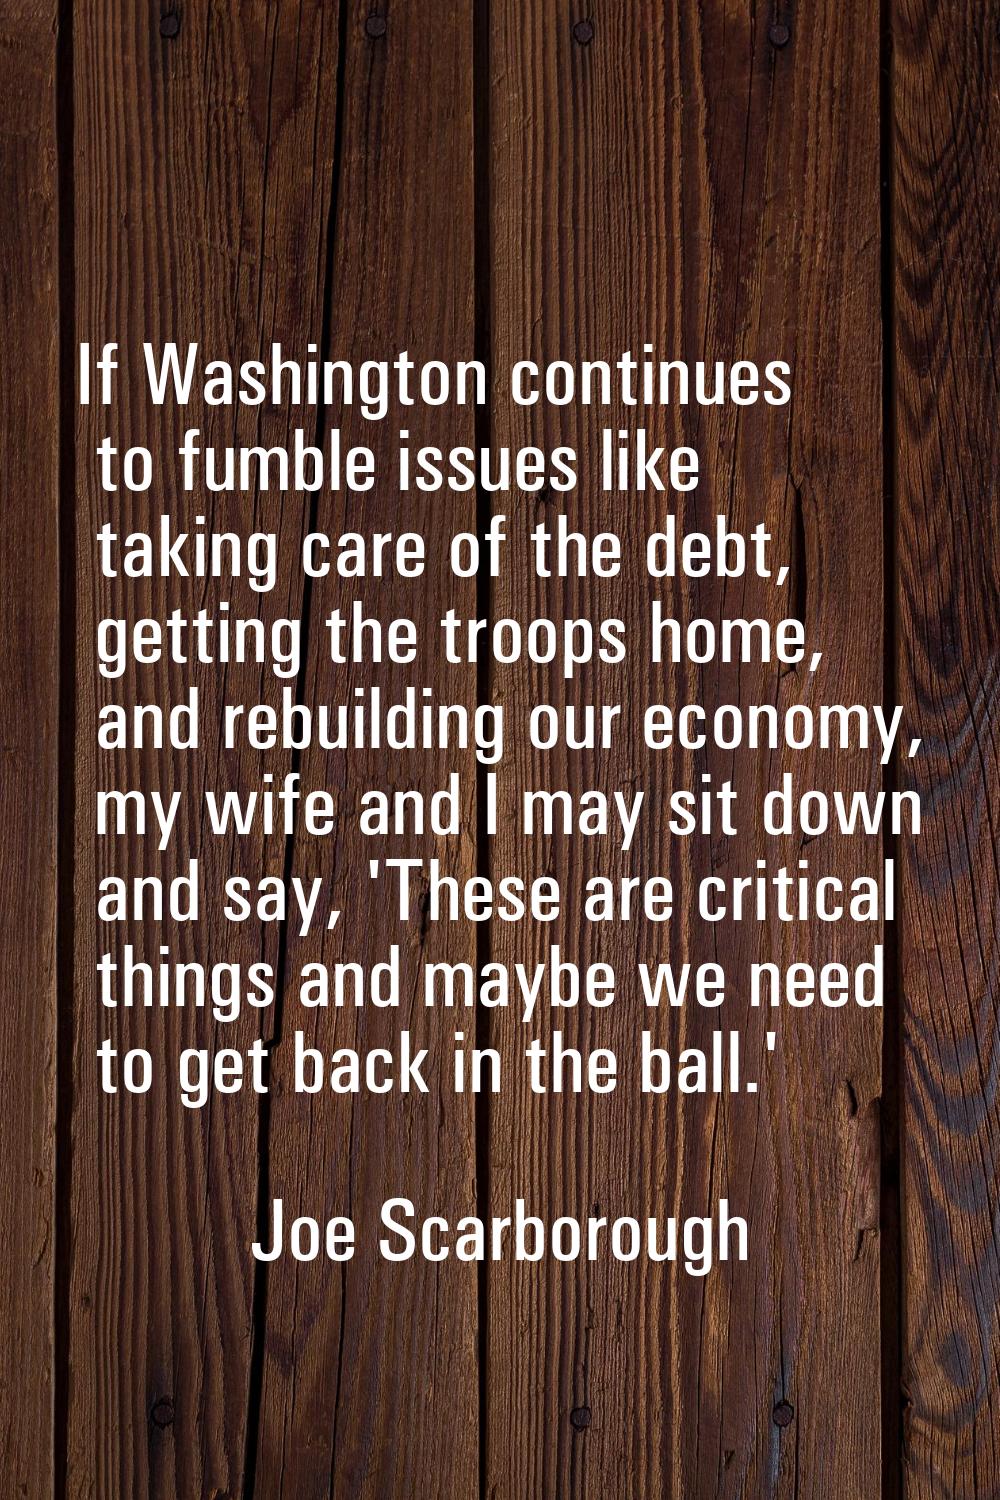 If Washington continues to fumble issues like taking care of the debt, getting the troops home, and